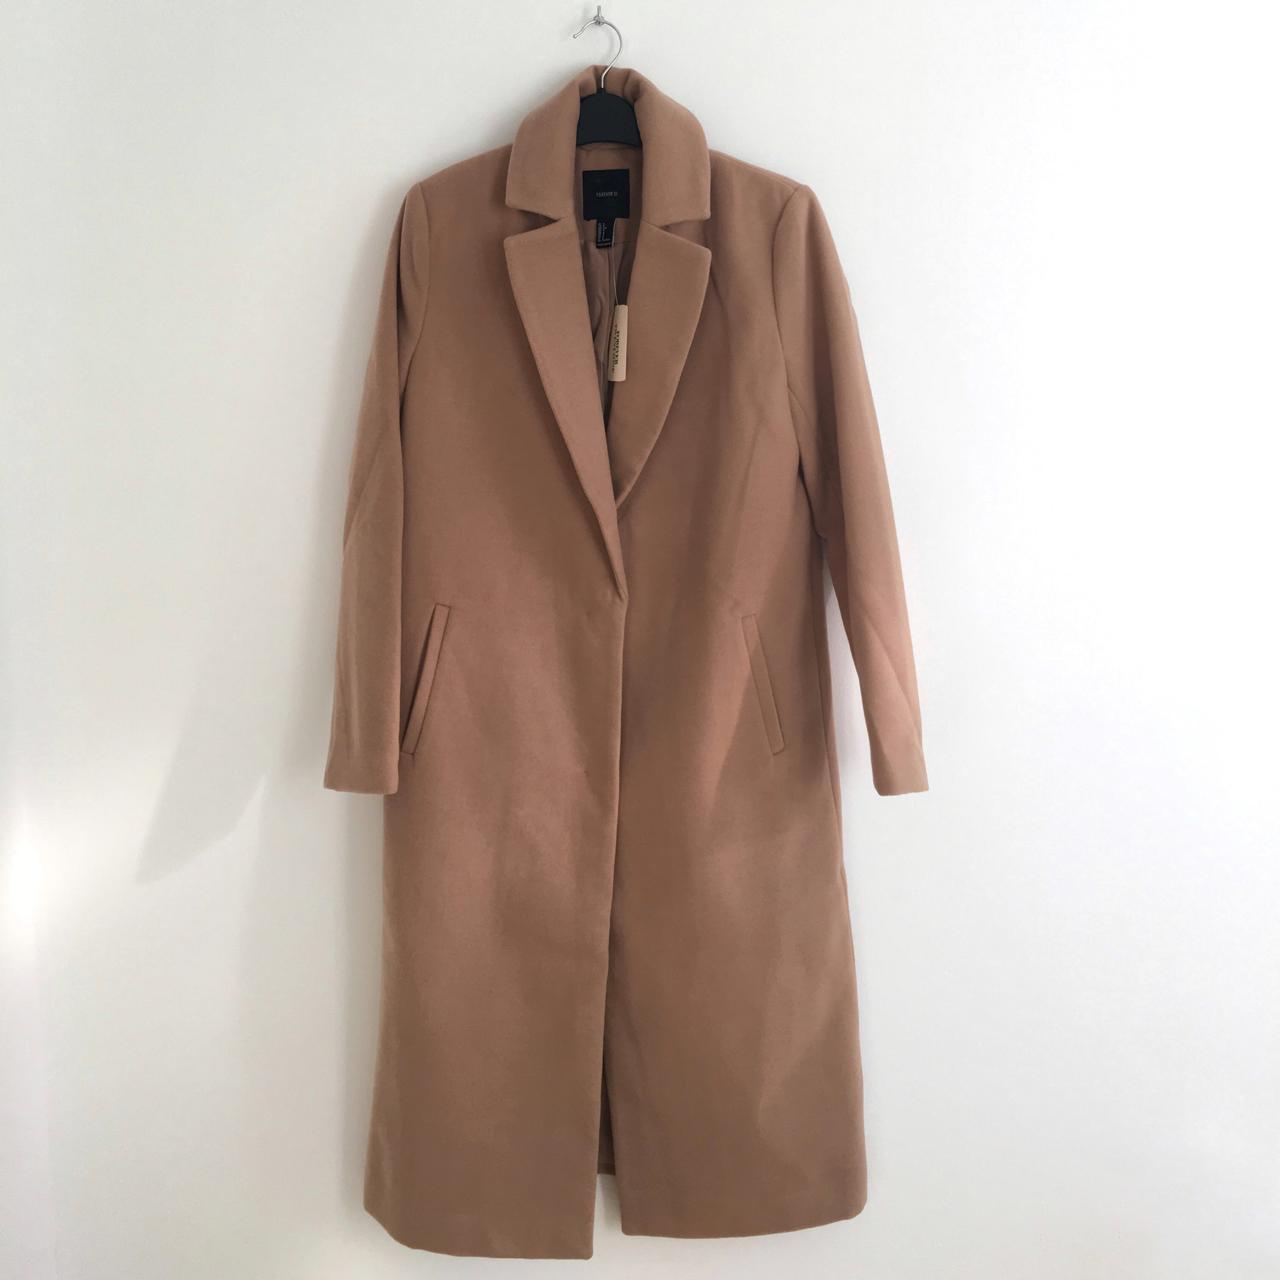 Forever 21 longline camel coat, brand new with tags,... - Depop